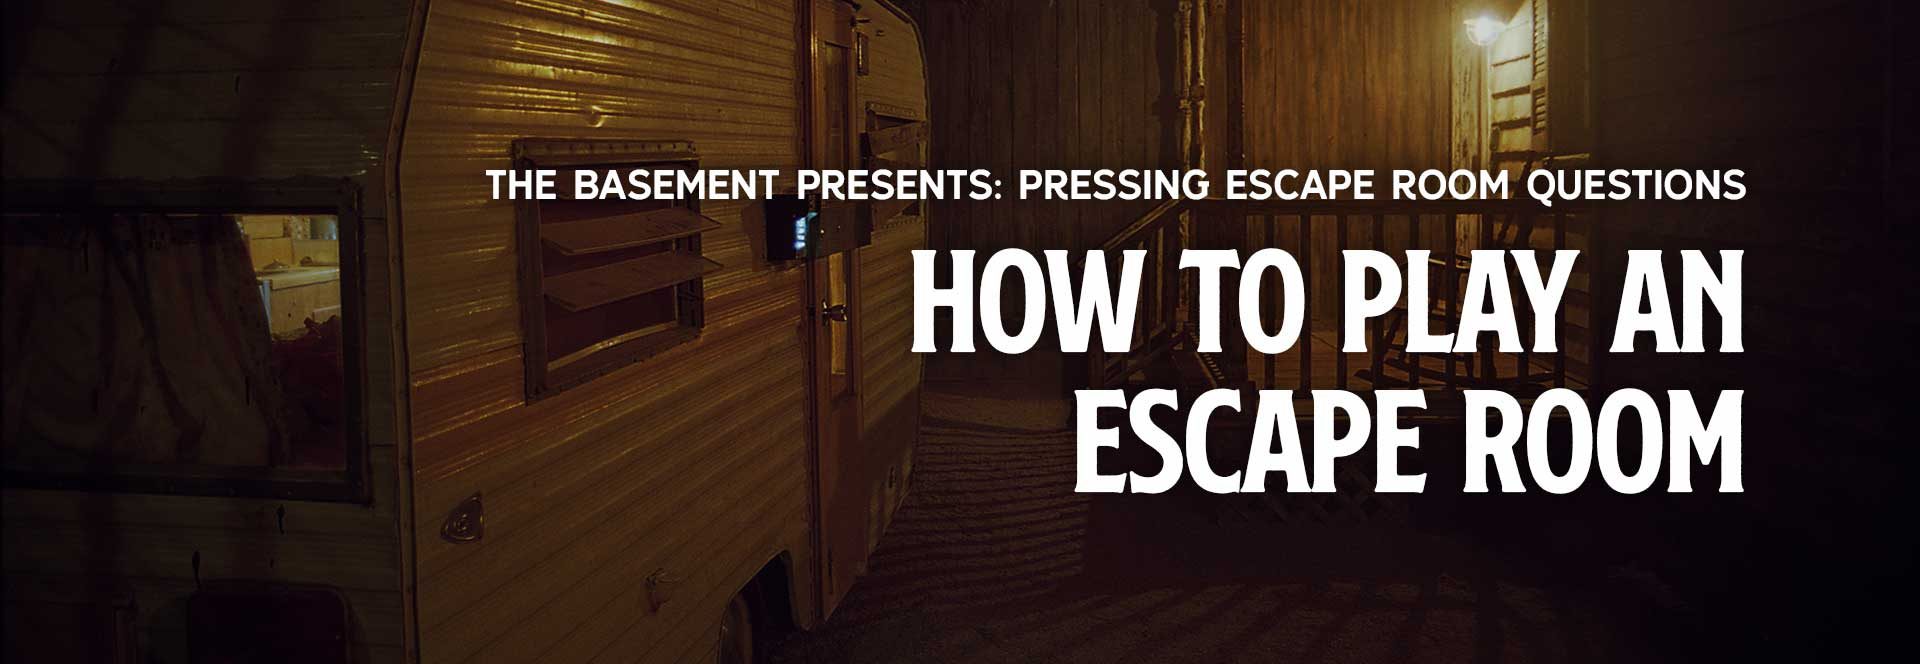 How to play an escape room